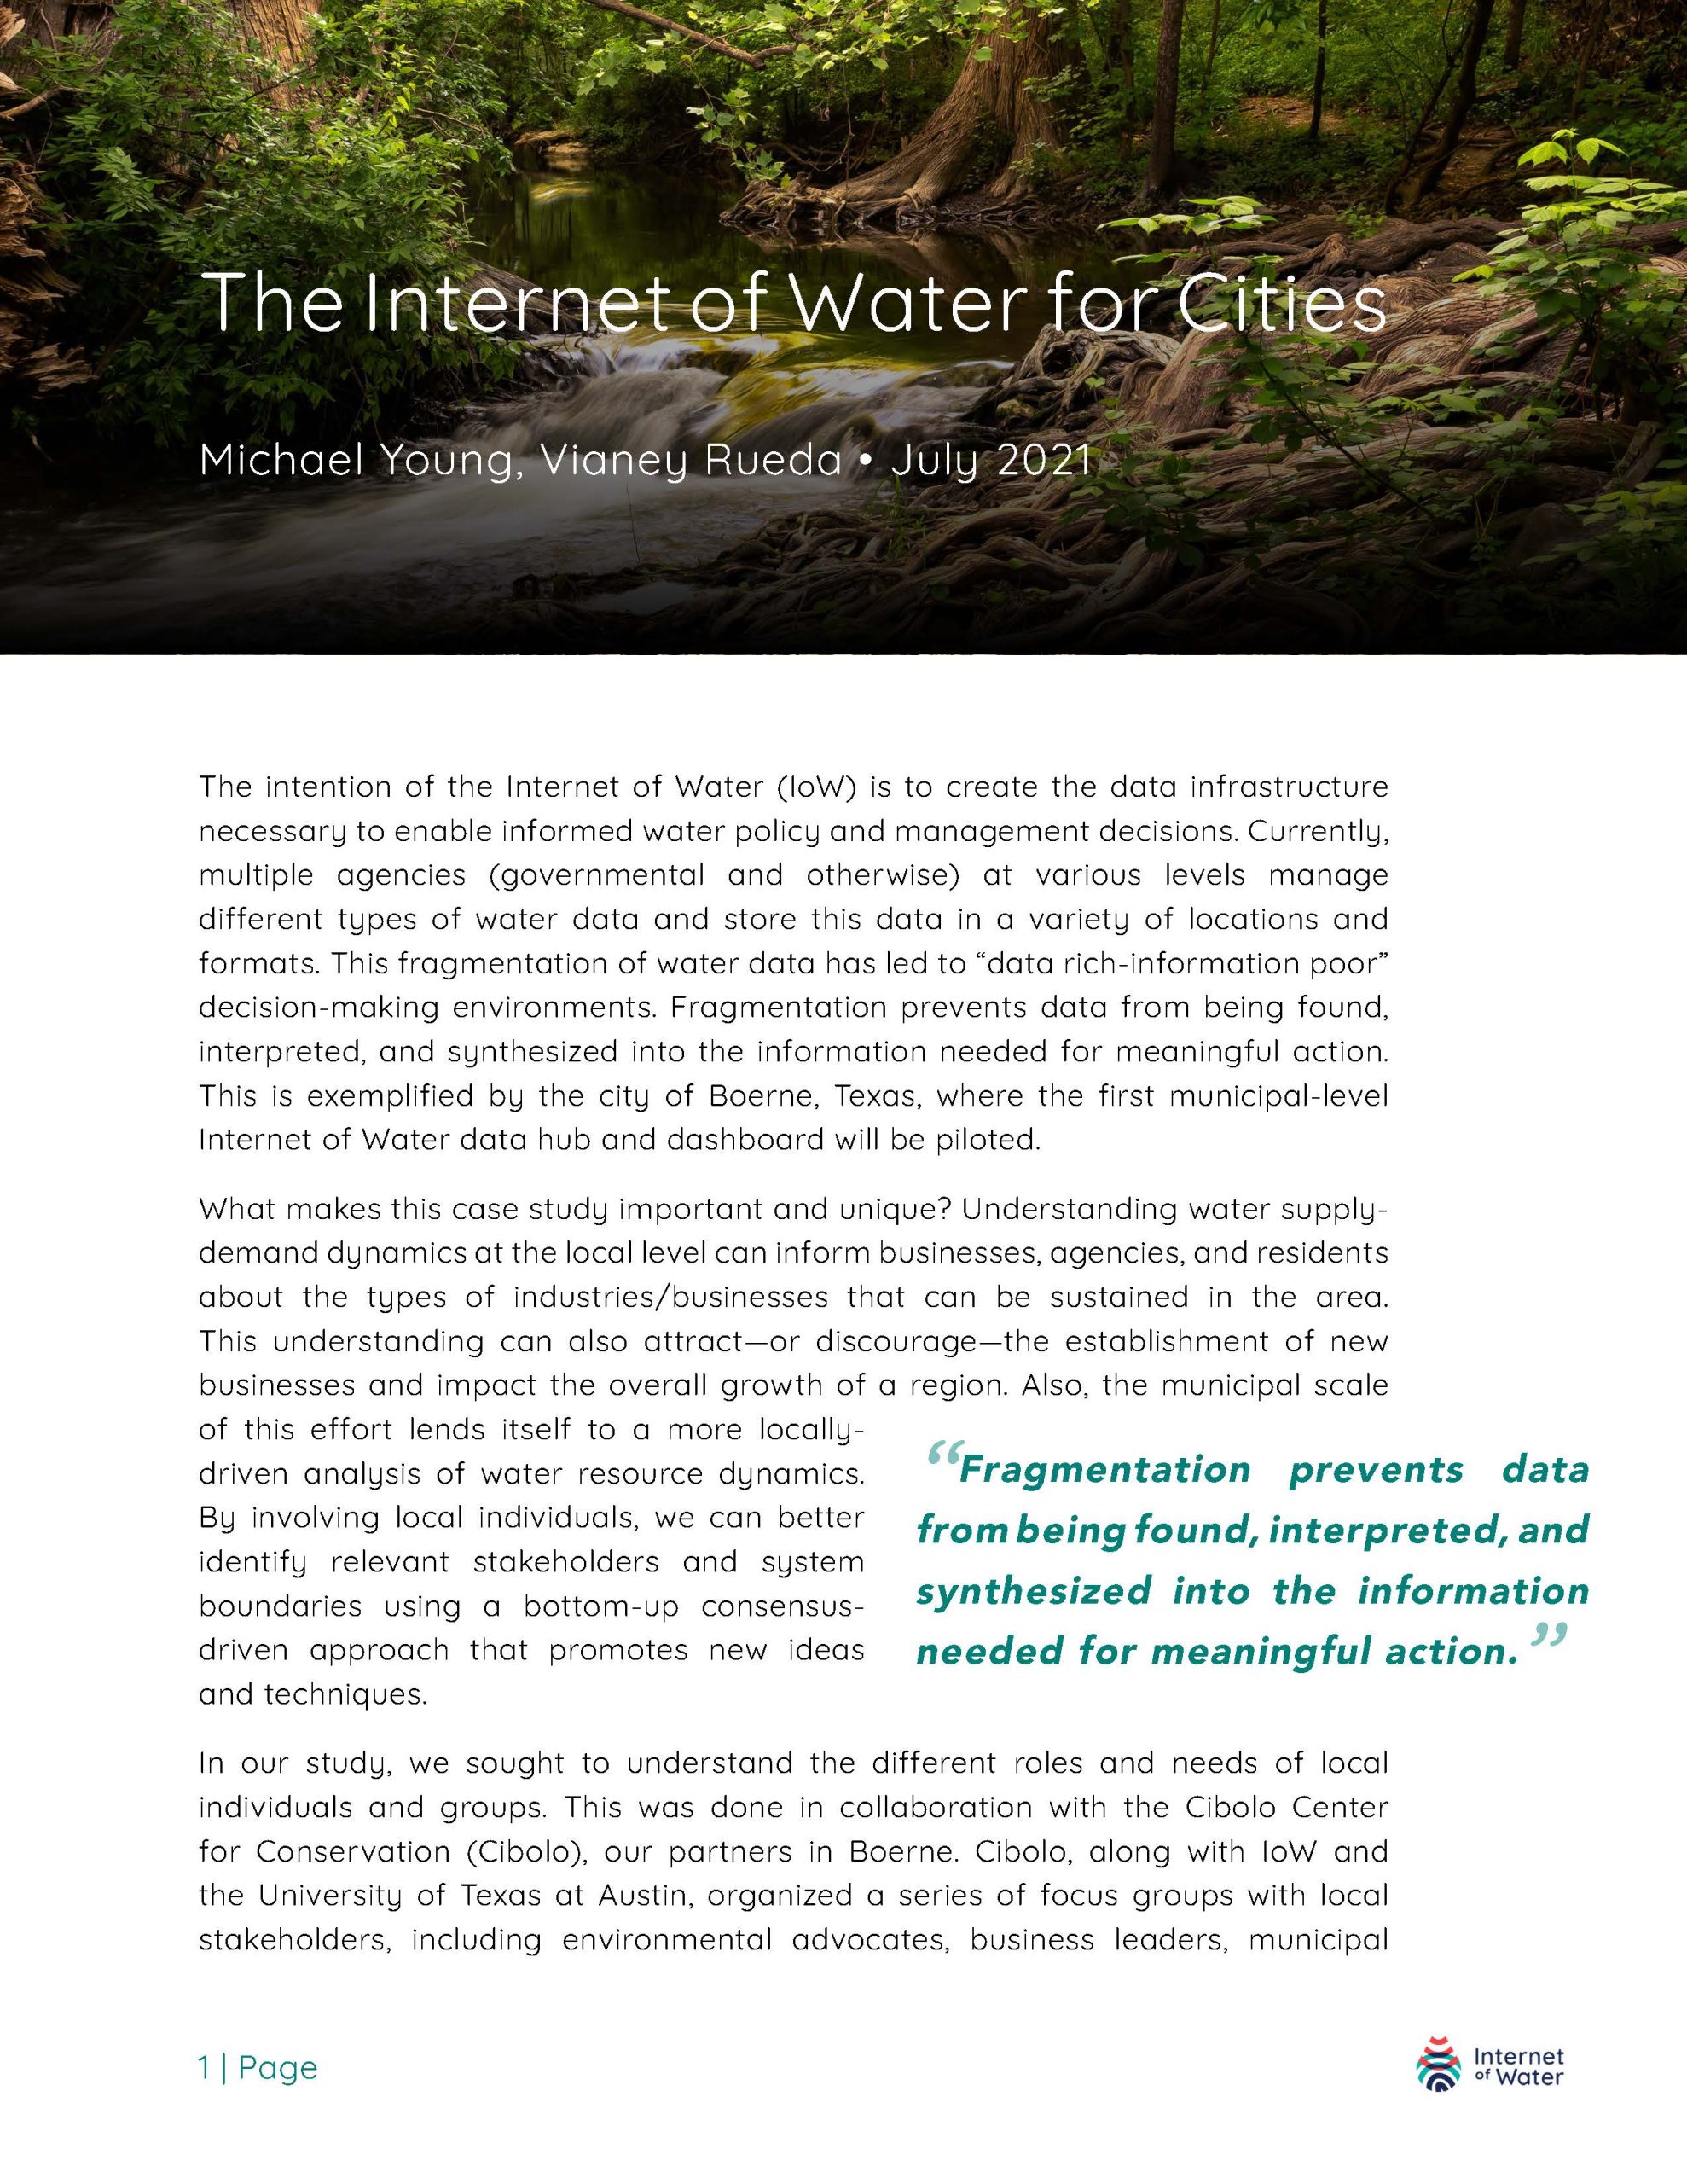 The Internet of Water for Cities